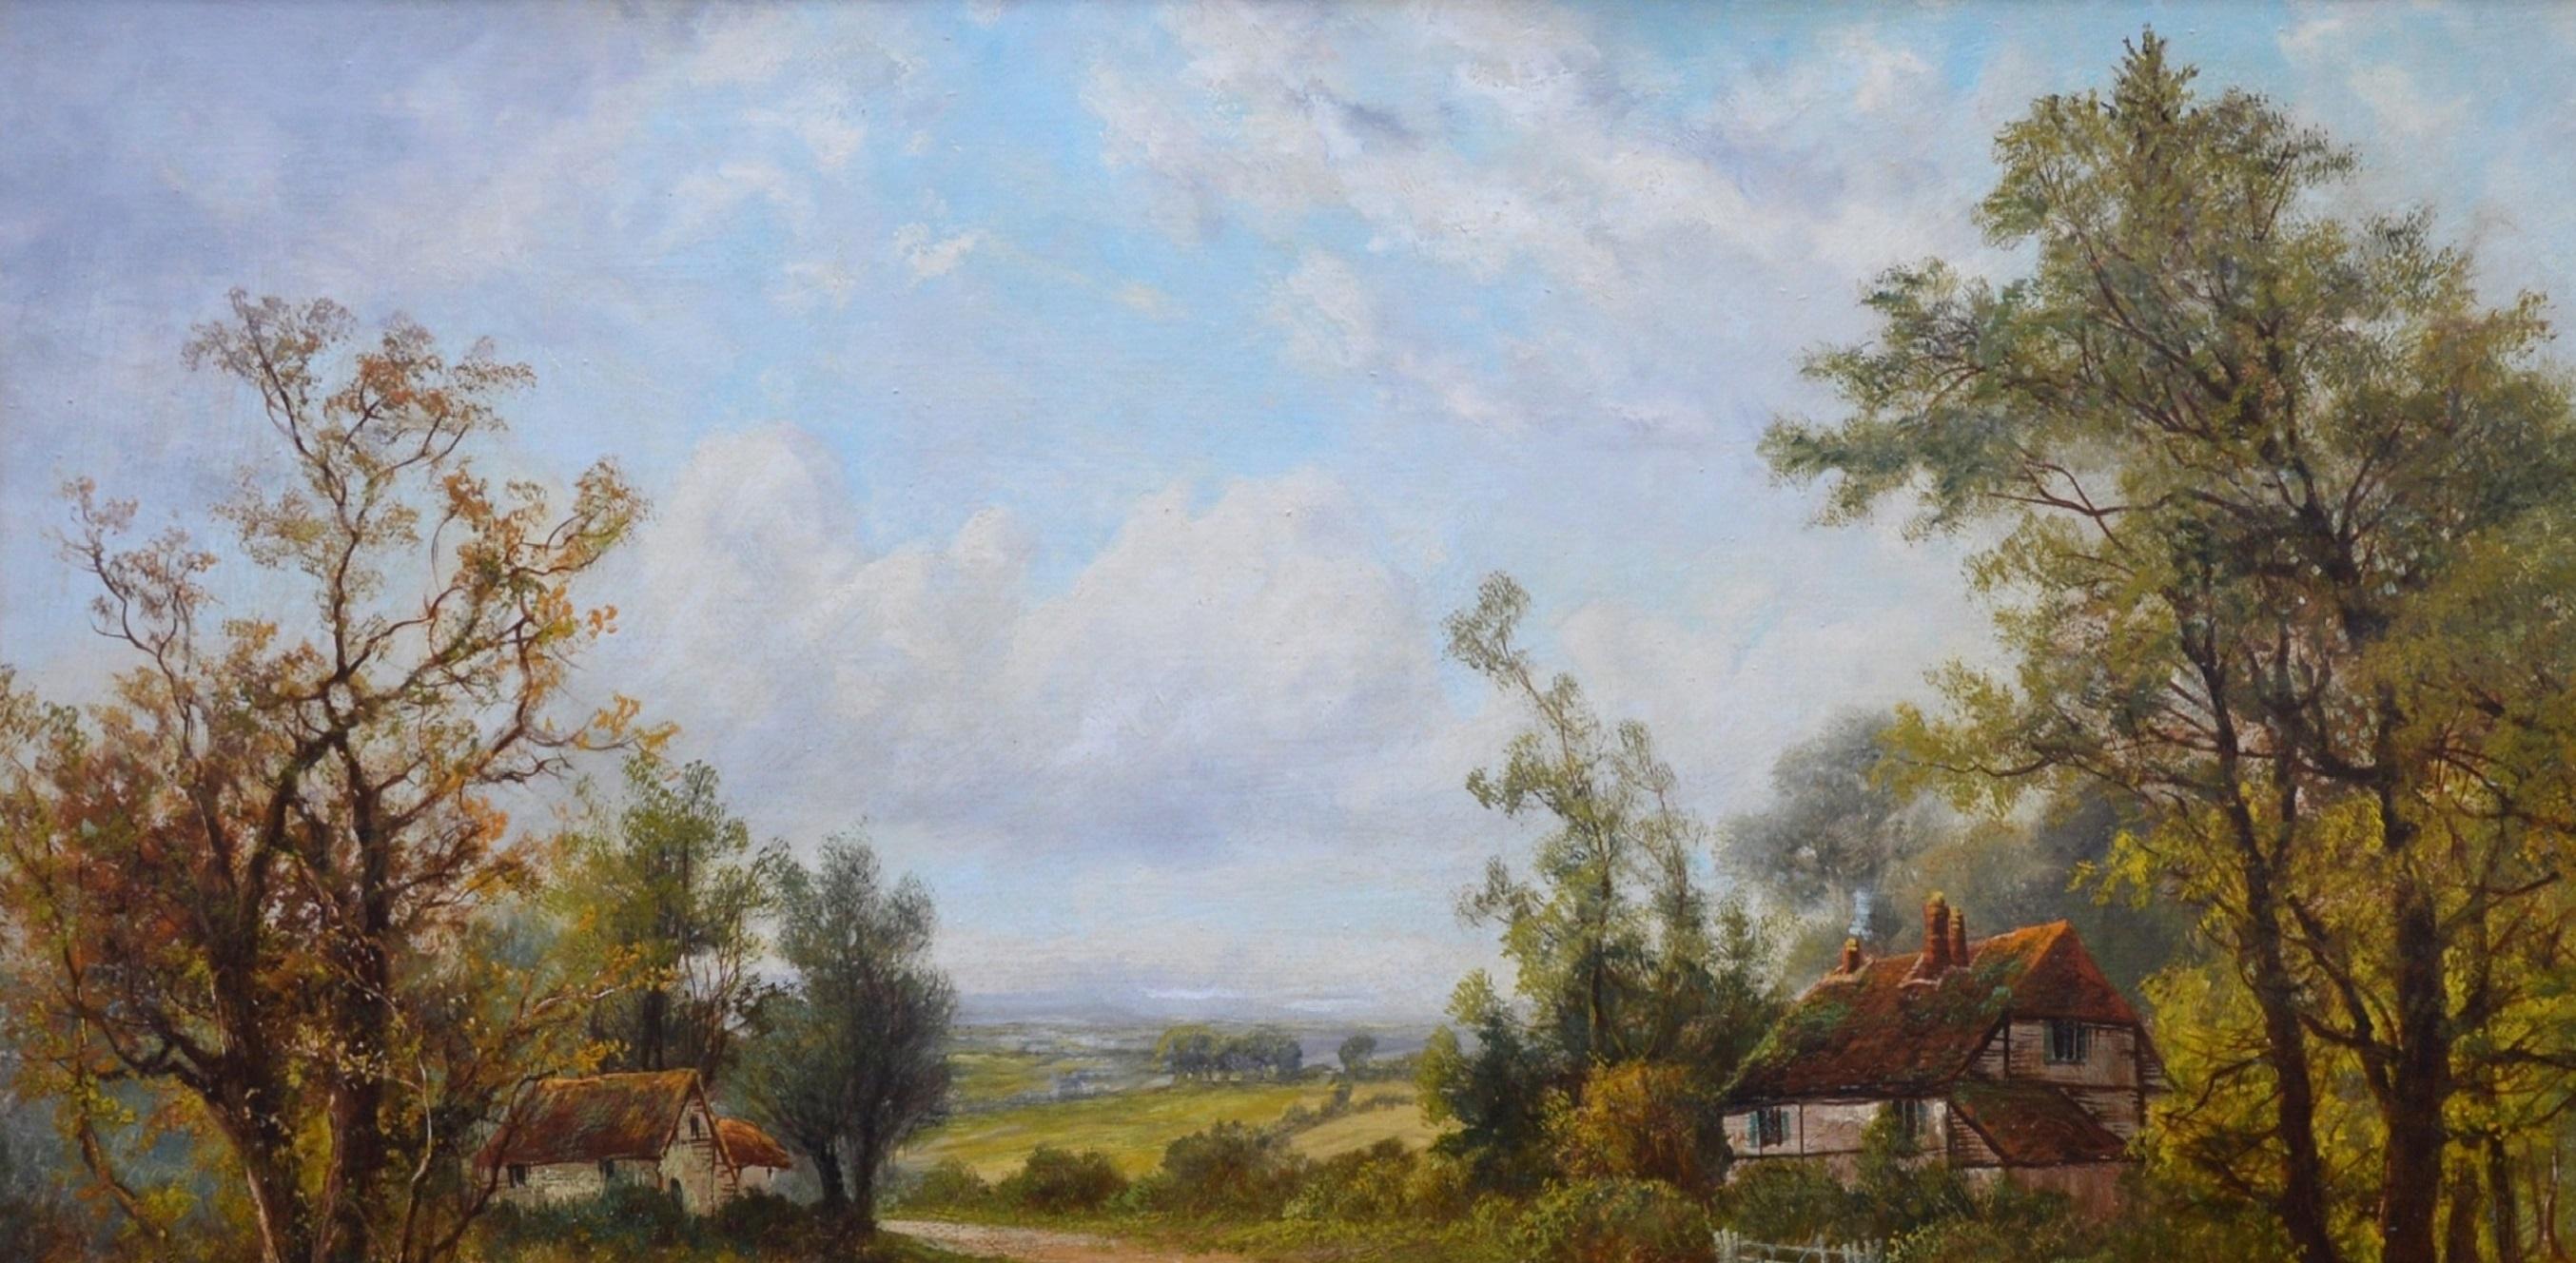 The Edge of Epping Forest - Large 19th Century English Landscape Oil Painting - Brown Figurative Painting by Octavius Thomas Clark